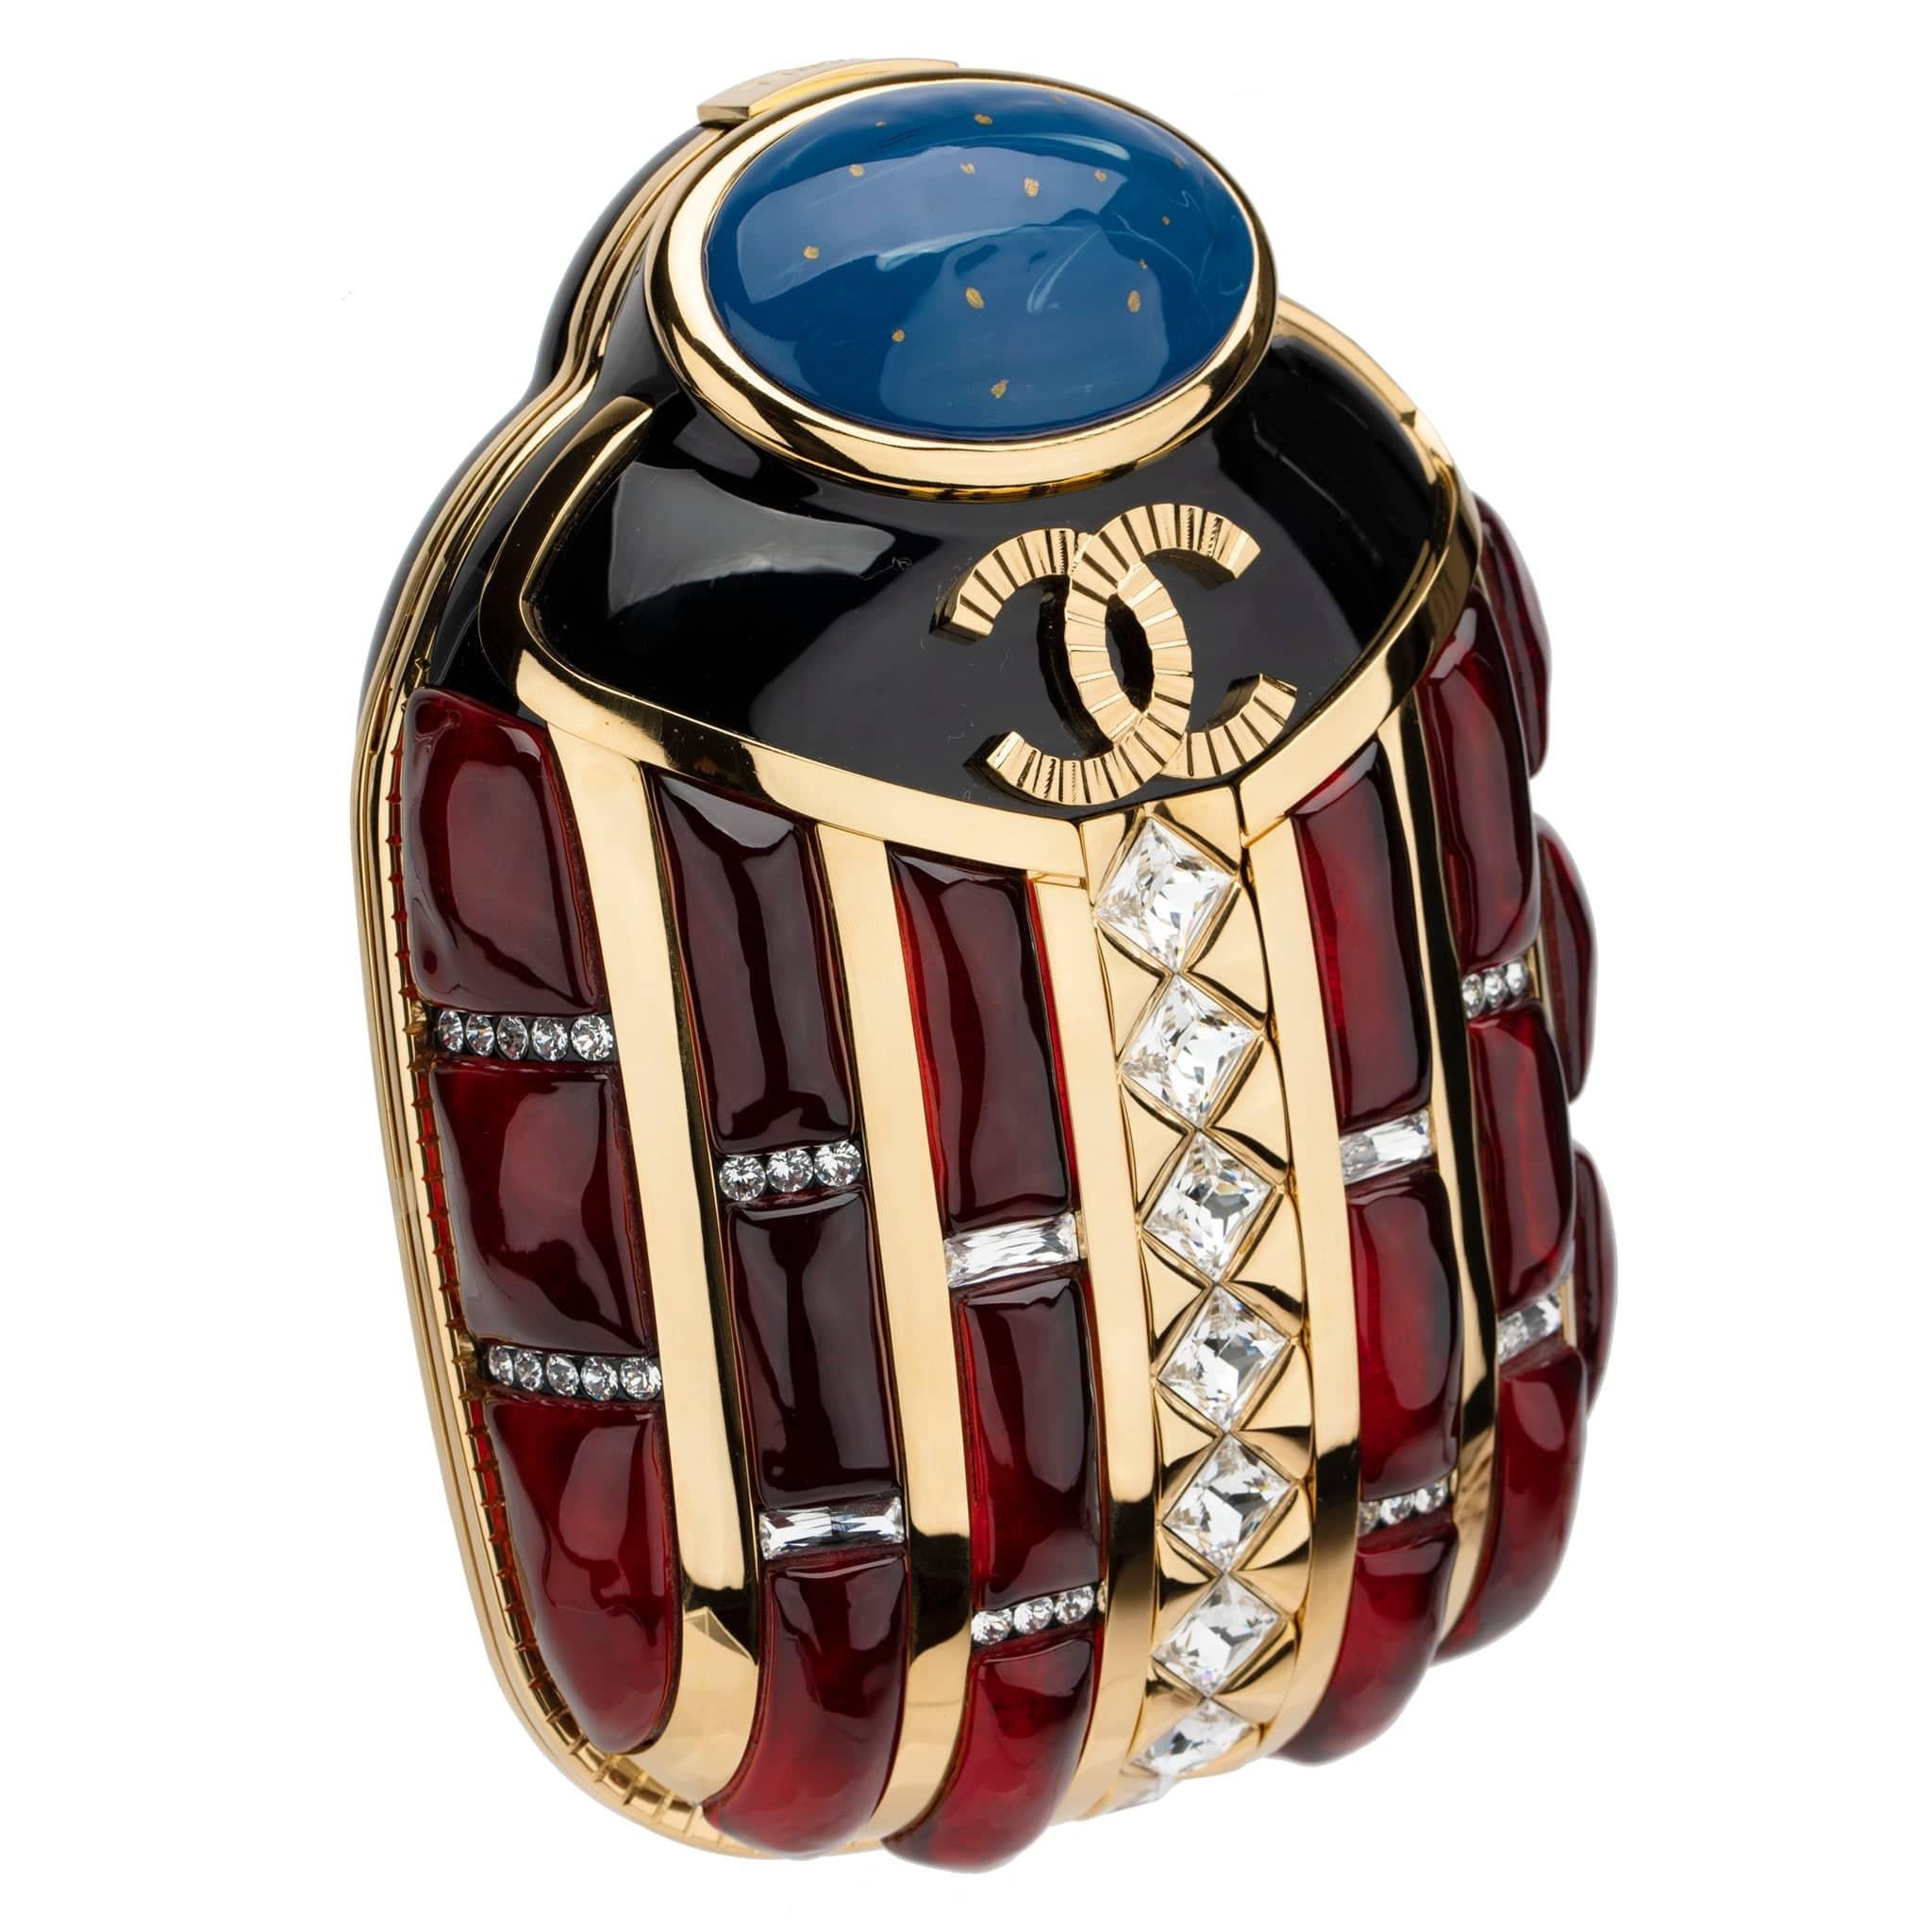 1stdibs Exclusive Chanel Scarab Minaudière Pre-Fall Métiers d’Art 2019 In Excellent Condition For Sale In Sydney, New South Wales